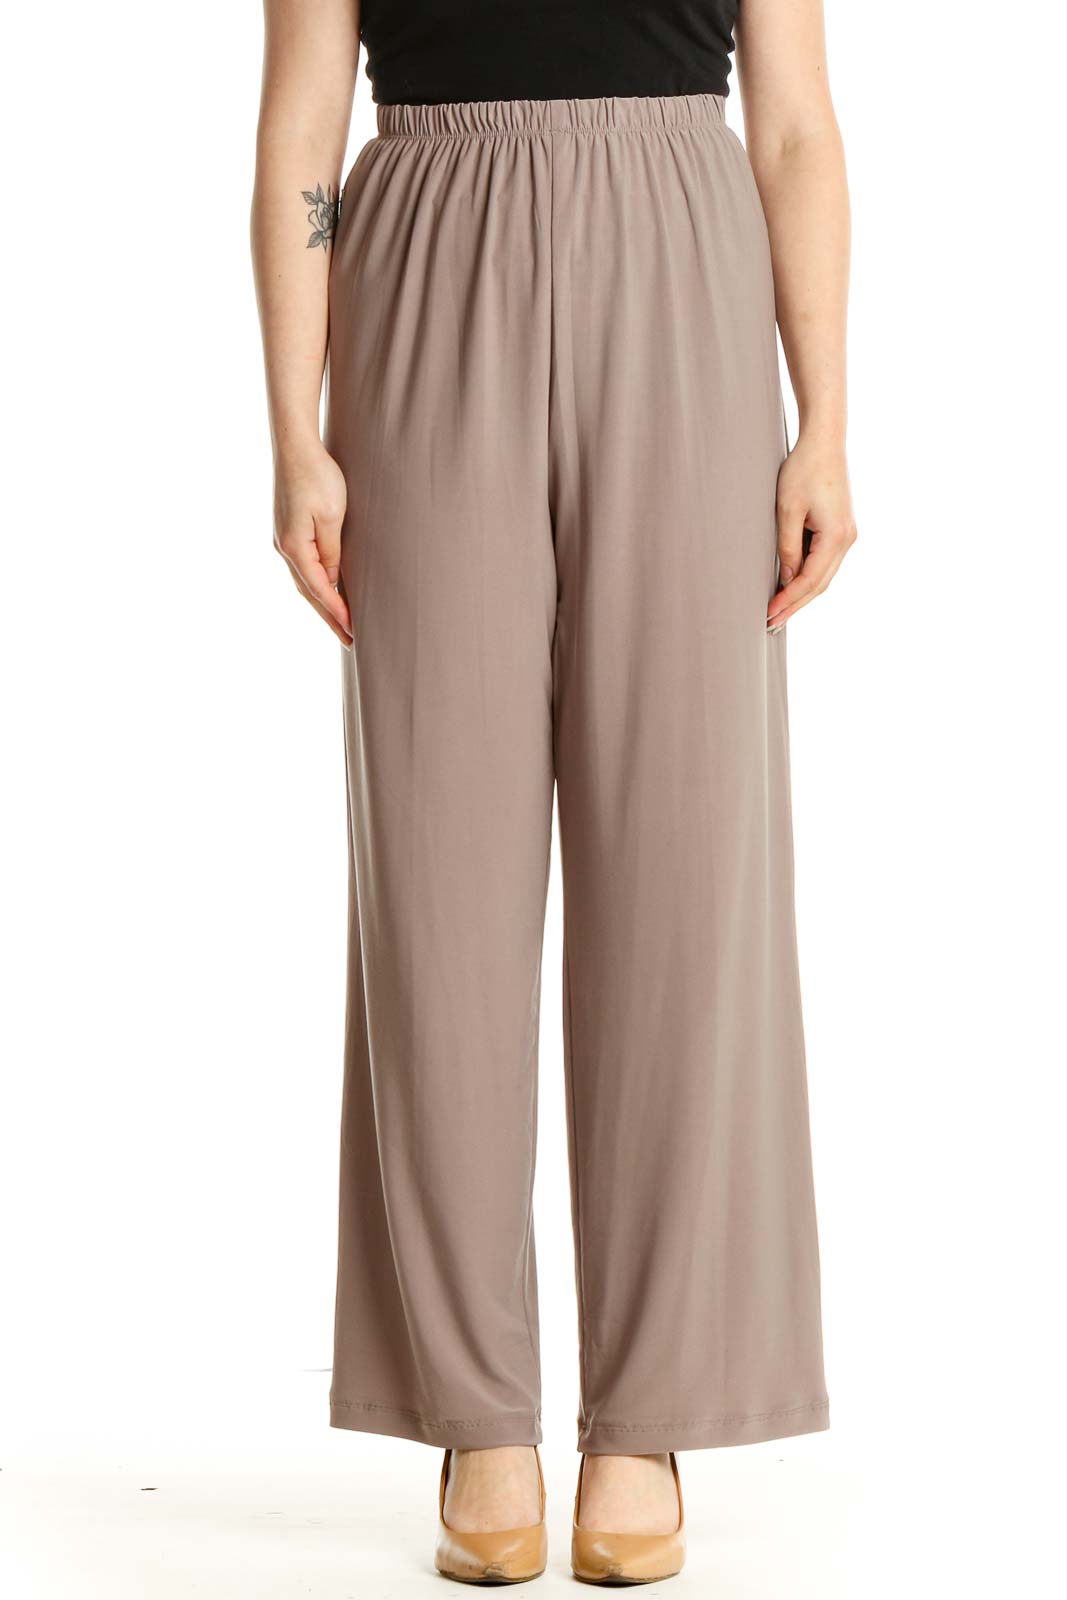 Beige Solid Casual Pants Front